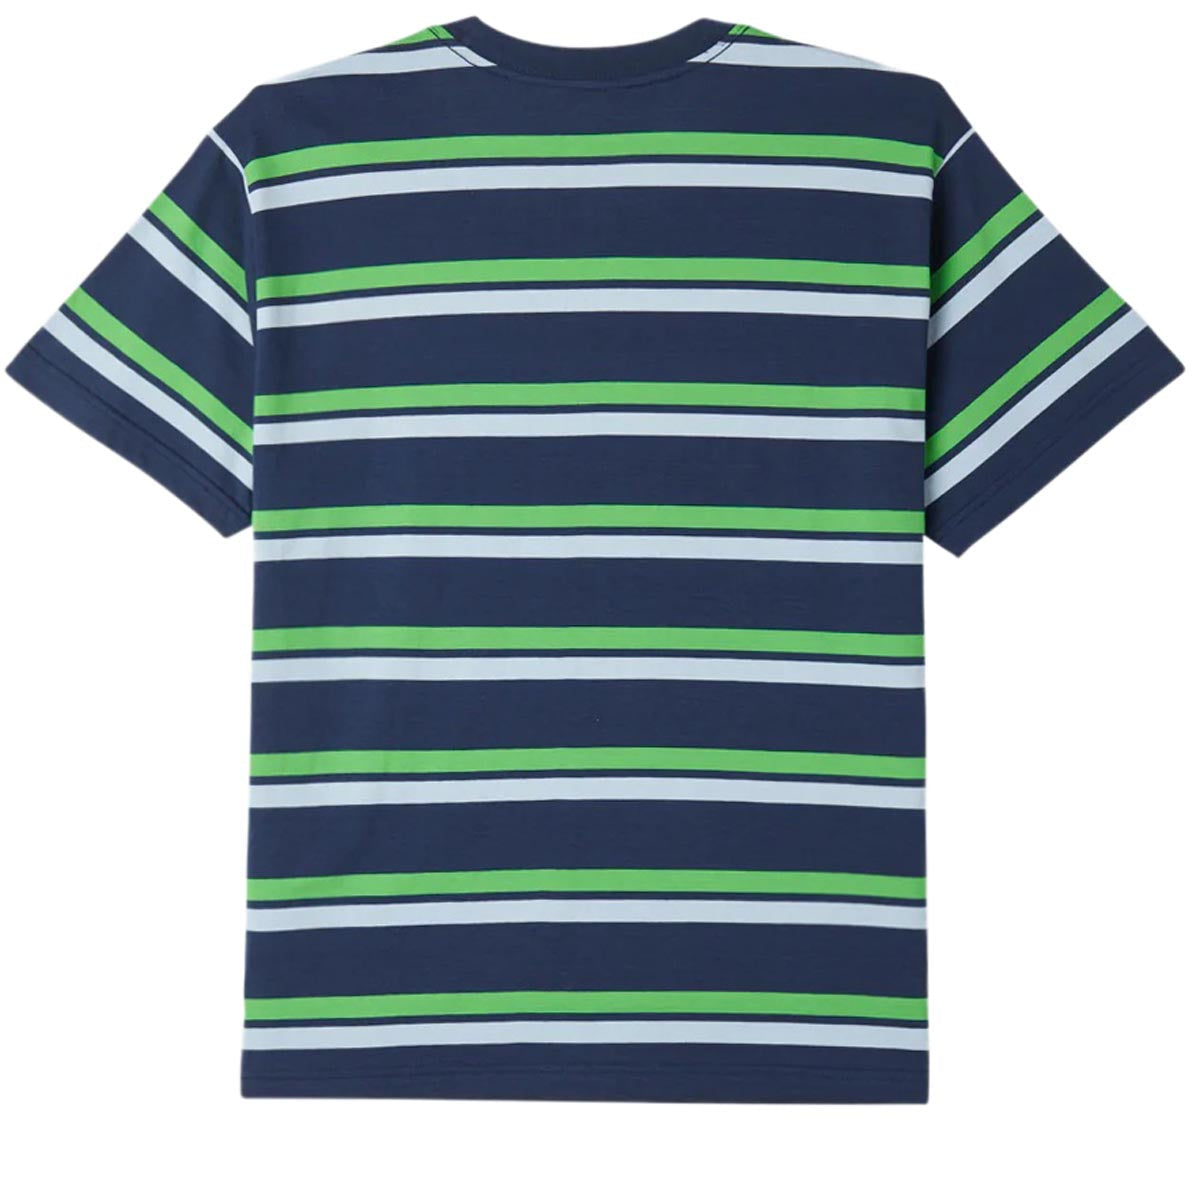 Obey Distance Stripe T-Shirt - Academy Navy image 2